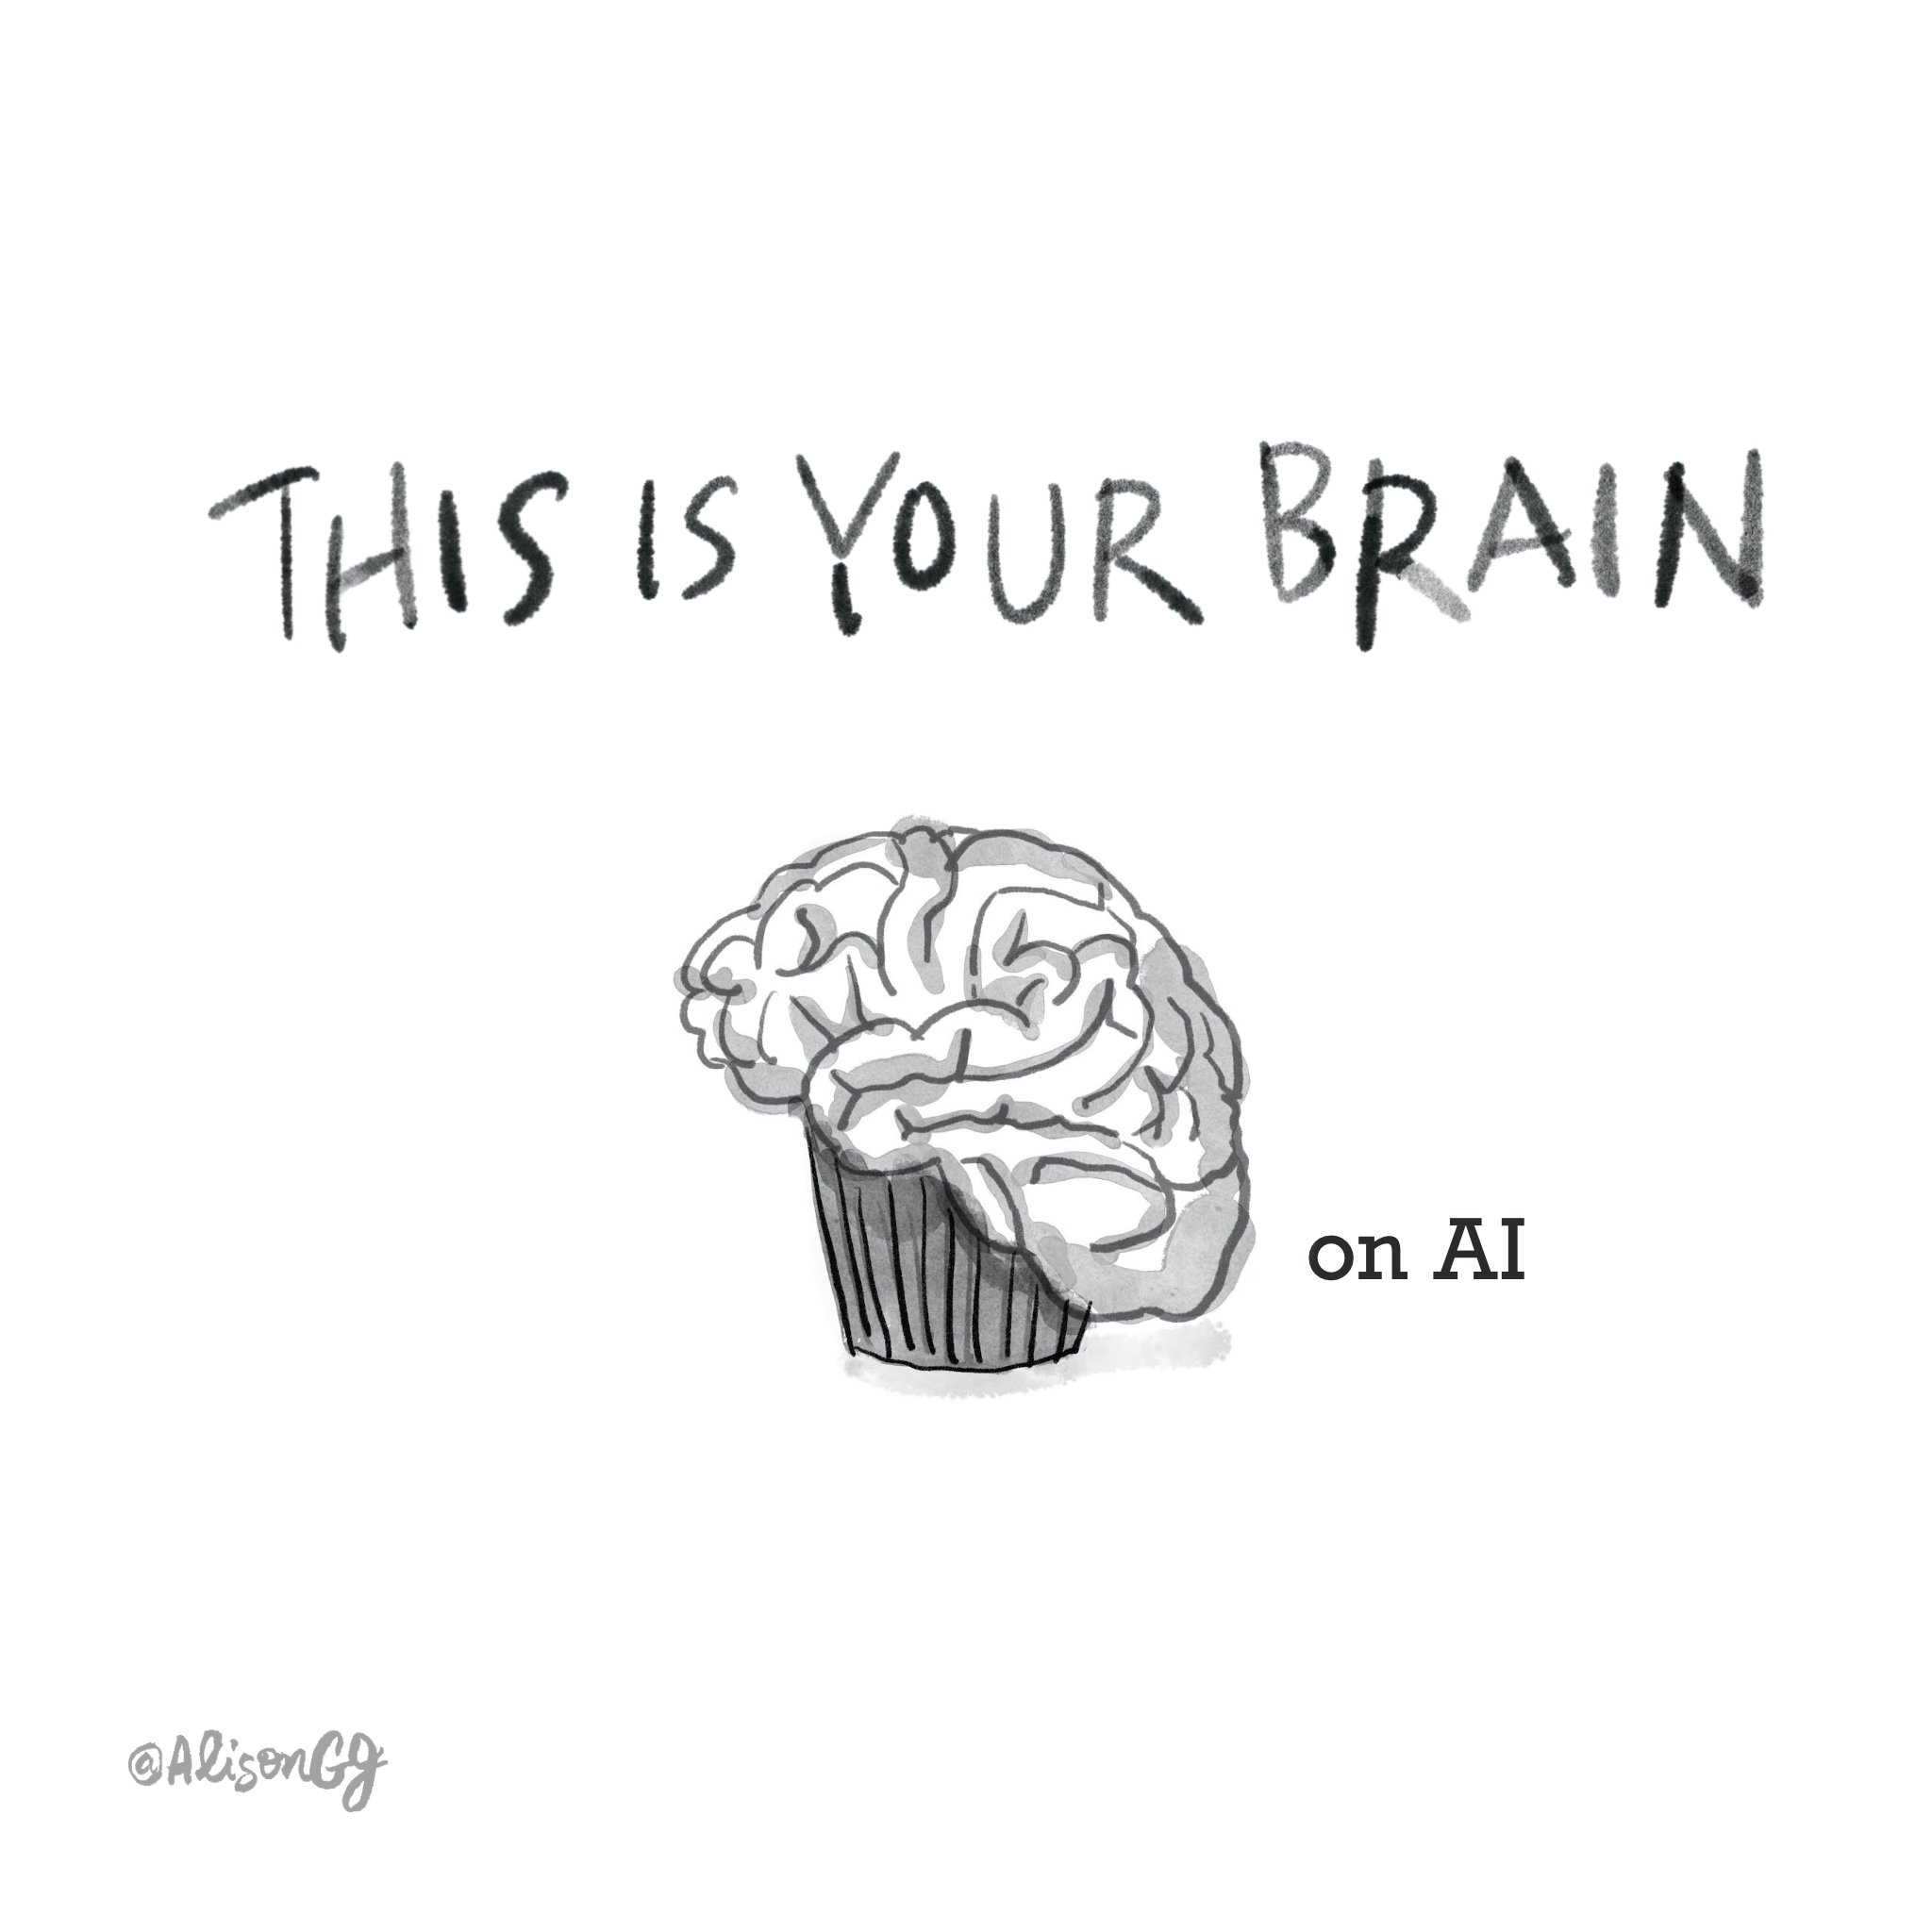 This is Your Brain on AI - illustrations by Alison Garwood-Jones